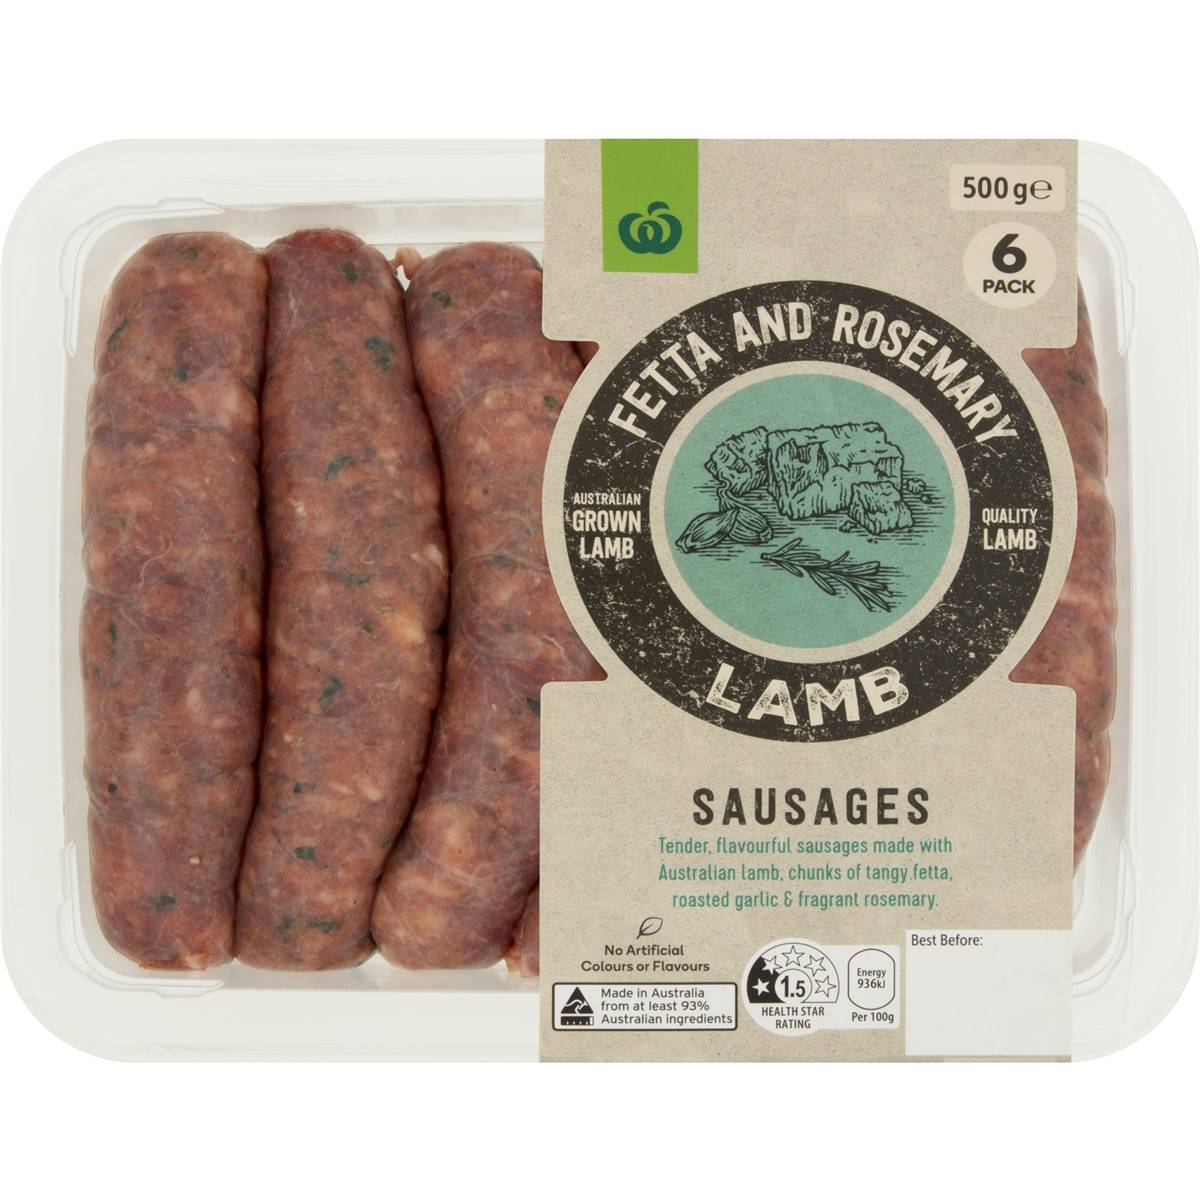 Calories in Woolworths Fetta & Rosemary Lamb Sausages